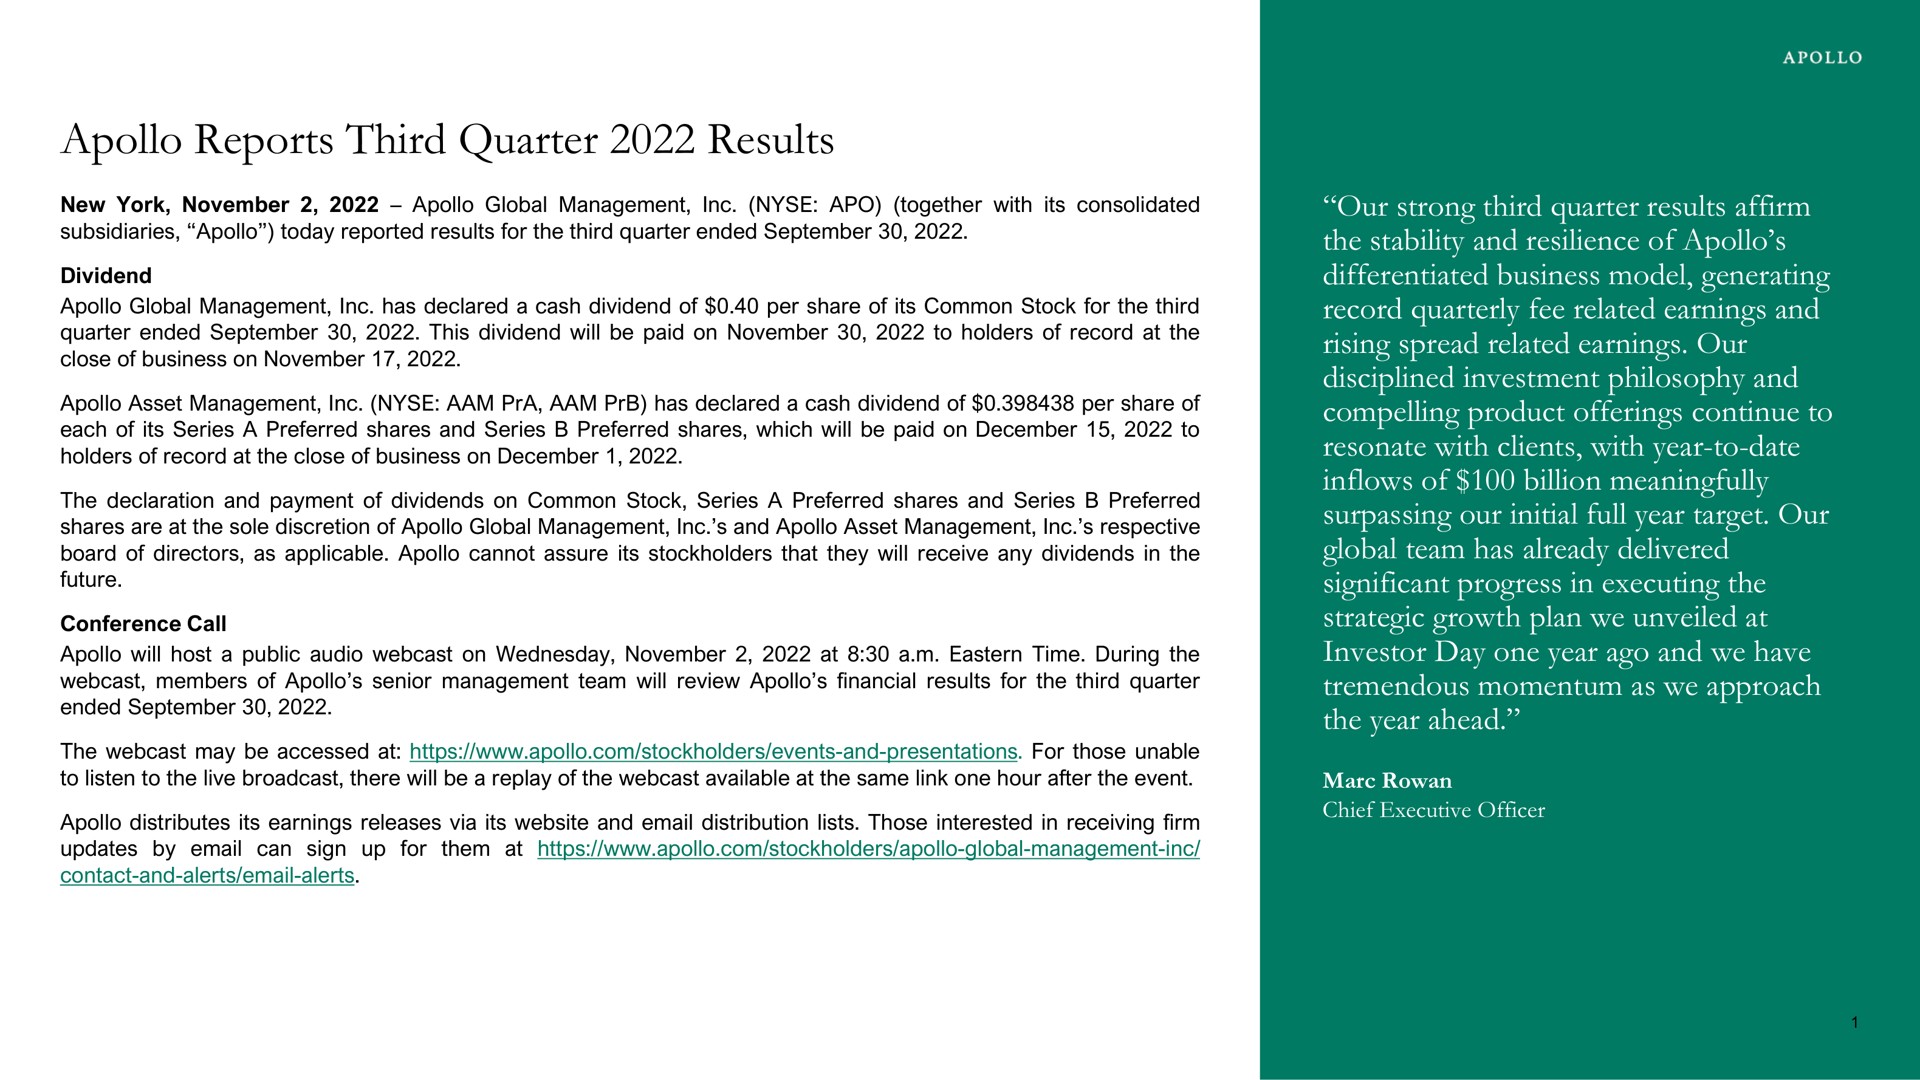 reports third quarter results our strong third quarter results affirm the stability and resilience of differentiated business model generating record quarterly fee related earnings and rising spread related earnings our disciplined investment philosophy and compelling product offerings continue to resonate with clients with year to date inflows of billion meaningfully surpassing our initial full year target our global team has already delivered significant progress in executing the strategic growth plan we unveiled at investor day one year ago and we have tremendous momentum as we approach the year ahead | Apollo Global Management